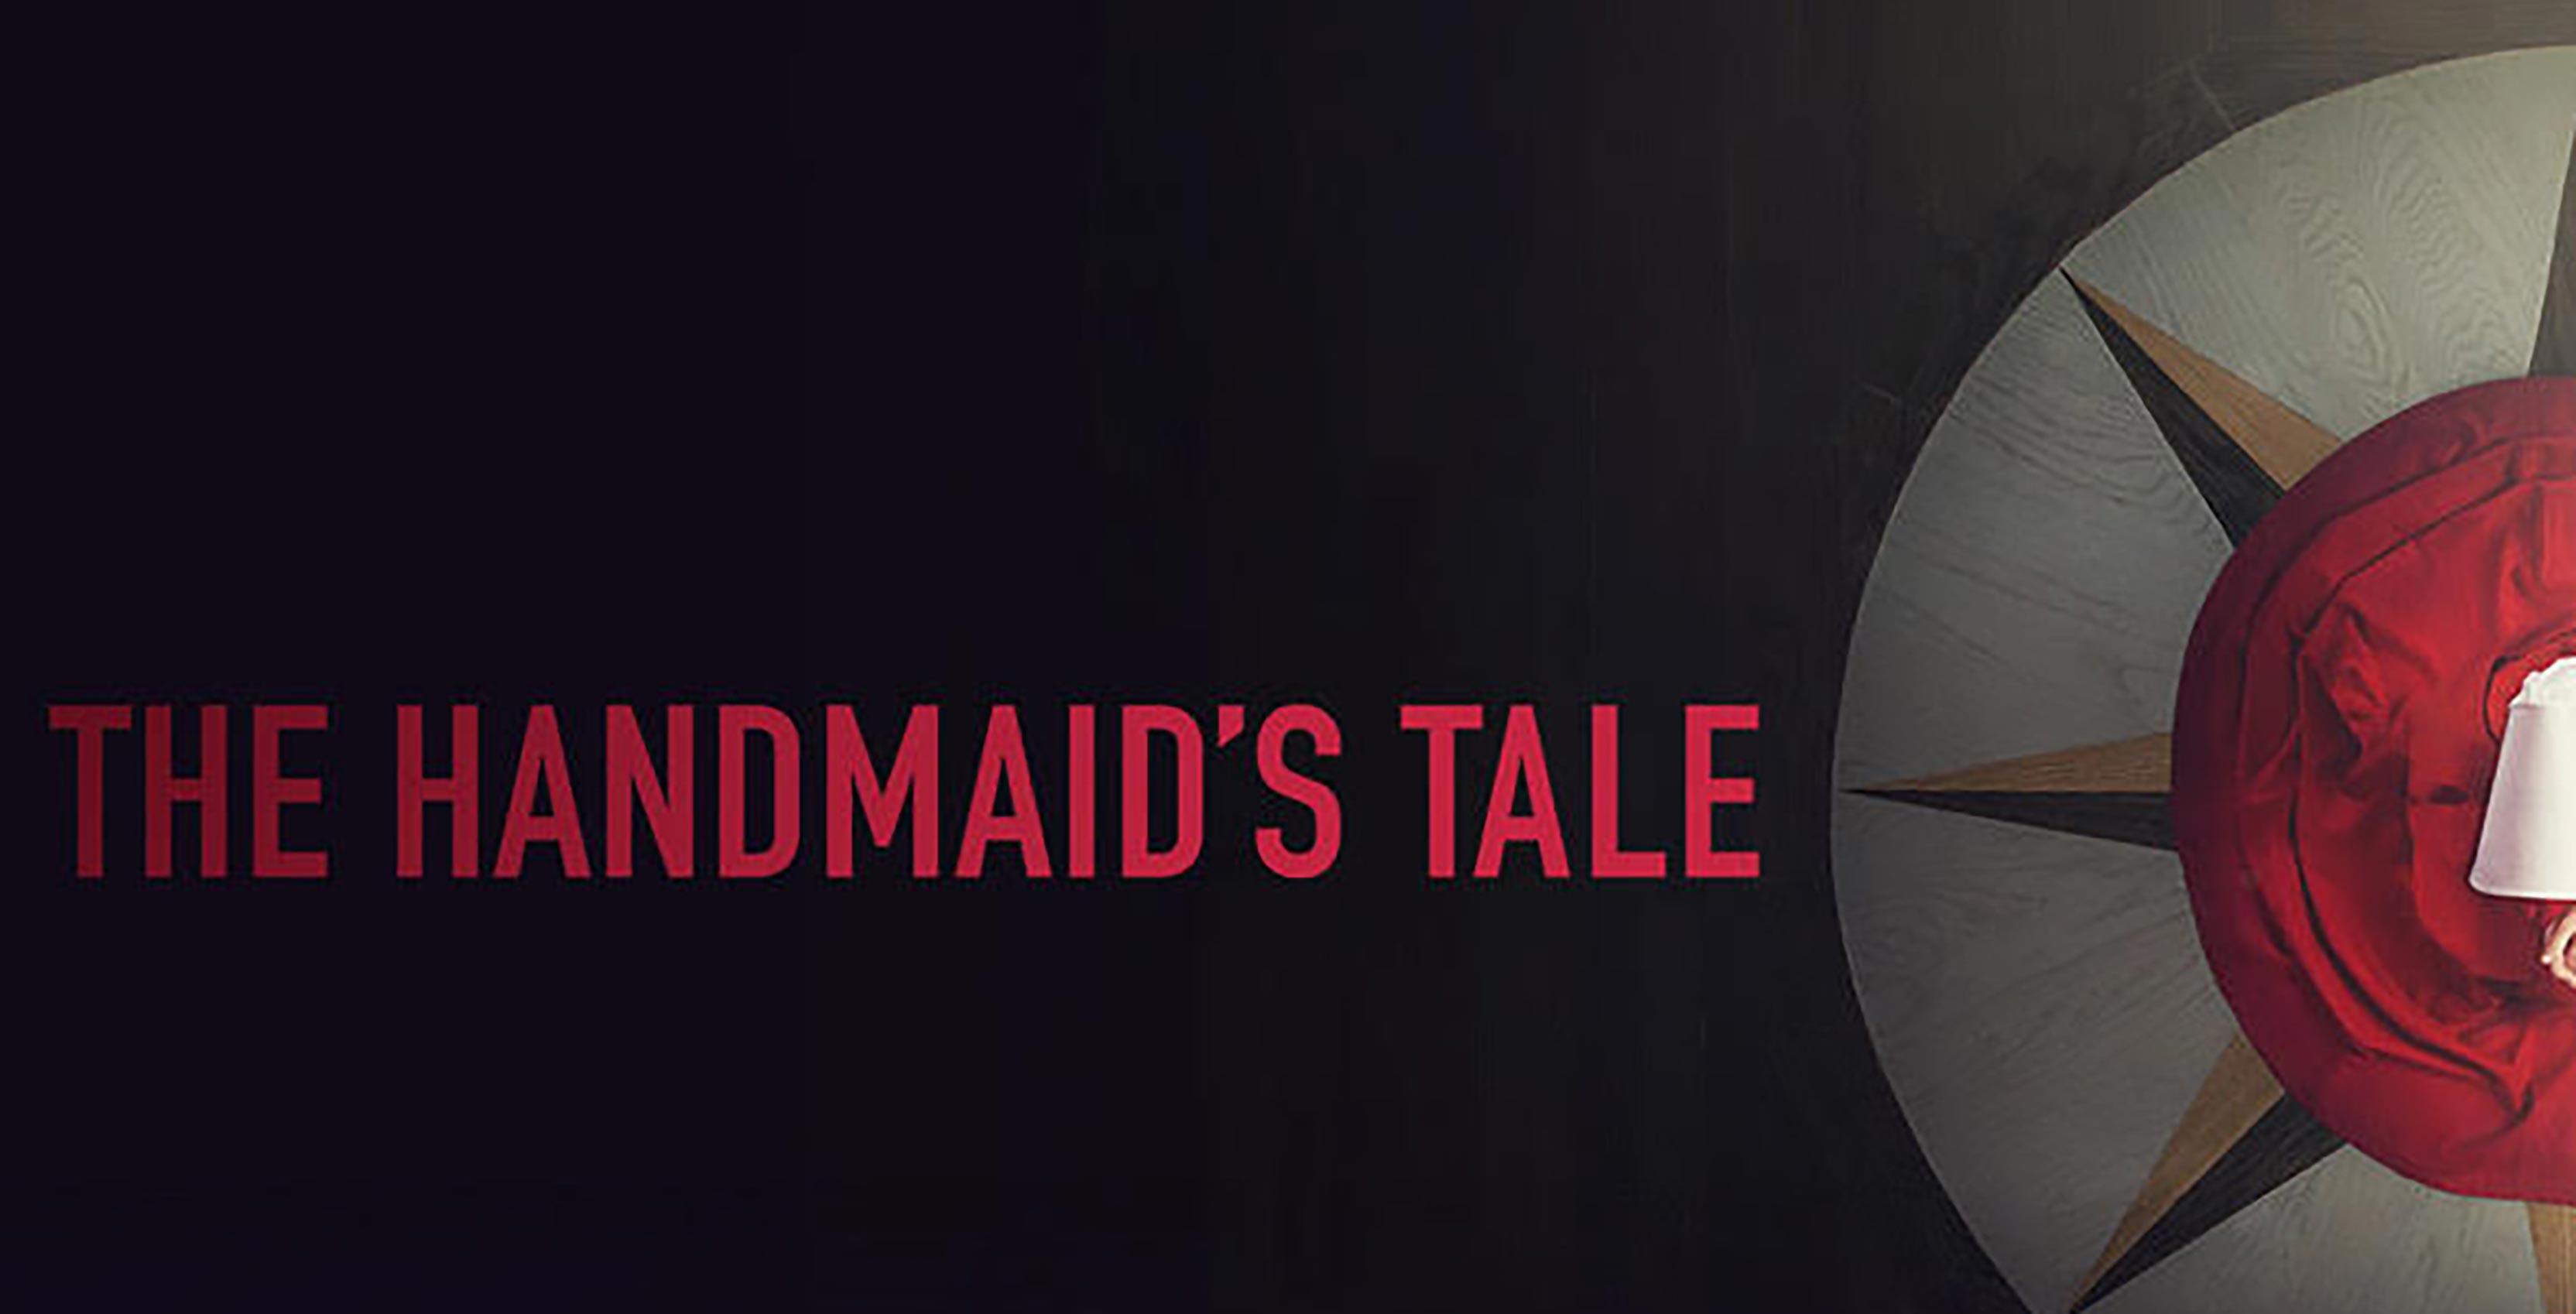 The Handmaid's Tale Season 1 releasing May 1 on iTunes in Canada